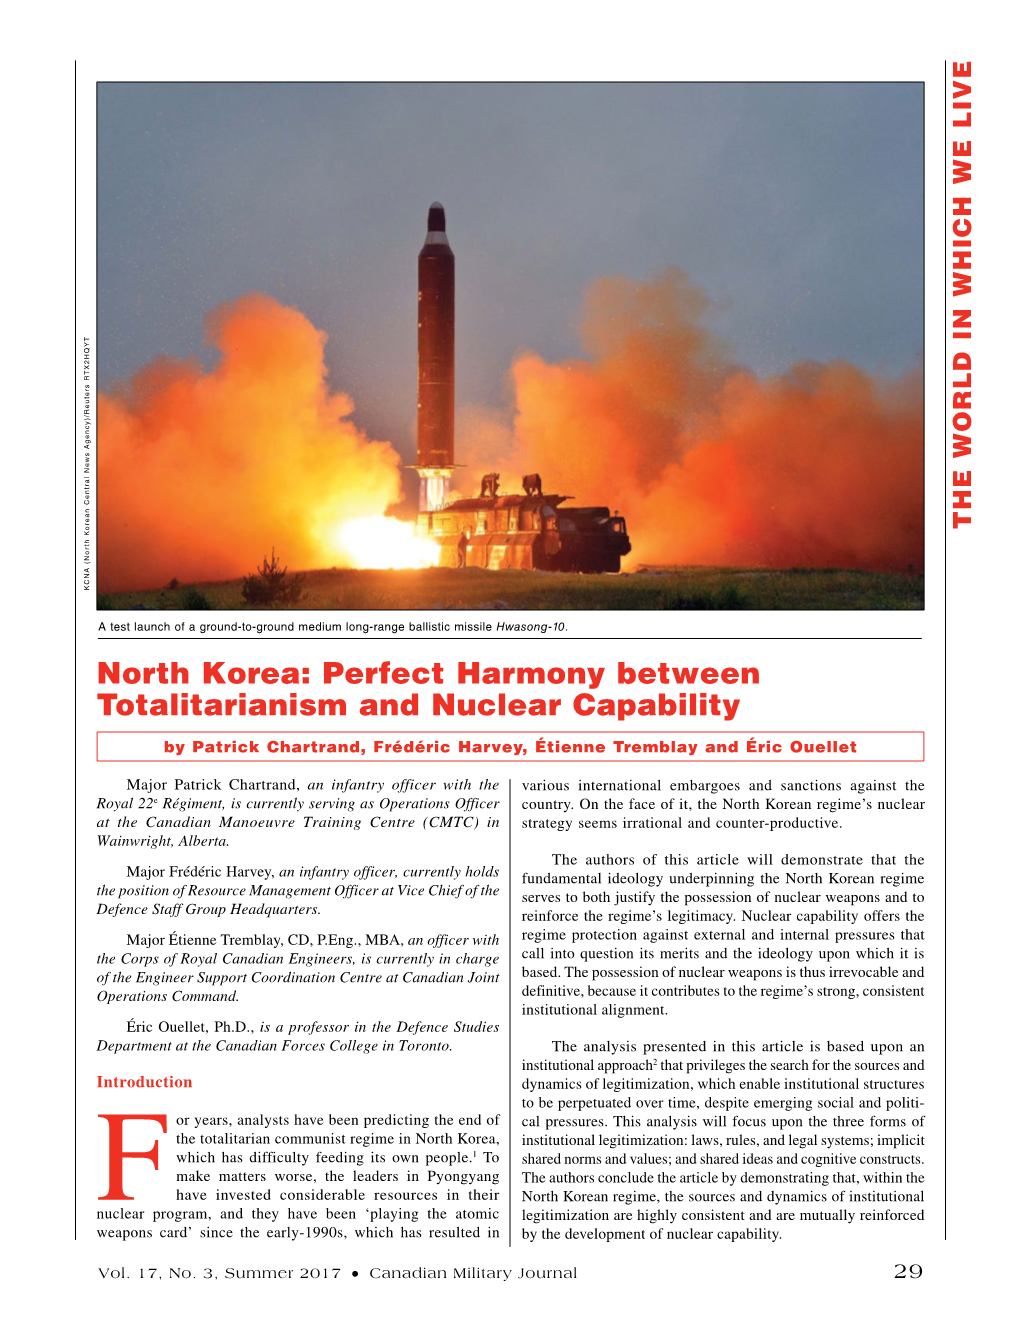 North Korea: Perfect Harmony Between Totalitarianism and Nuclear Capability